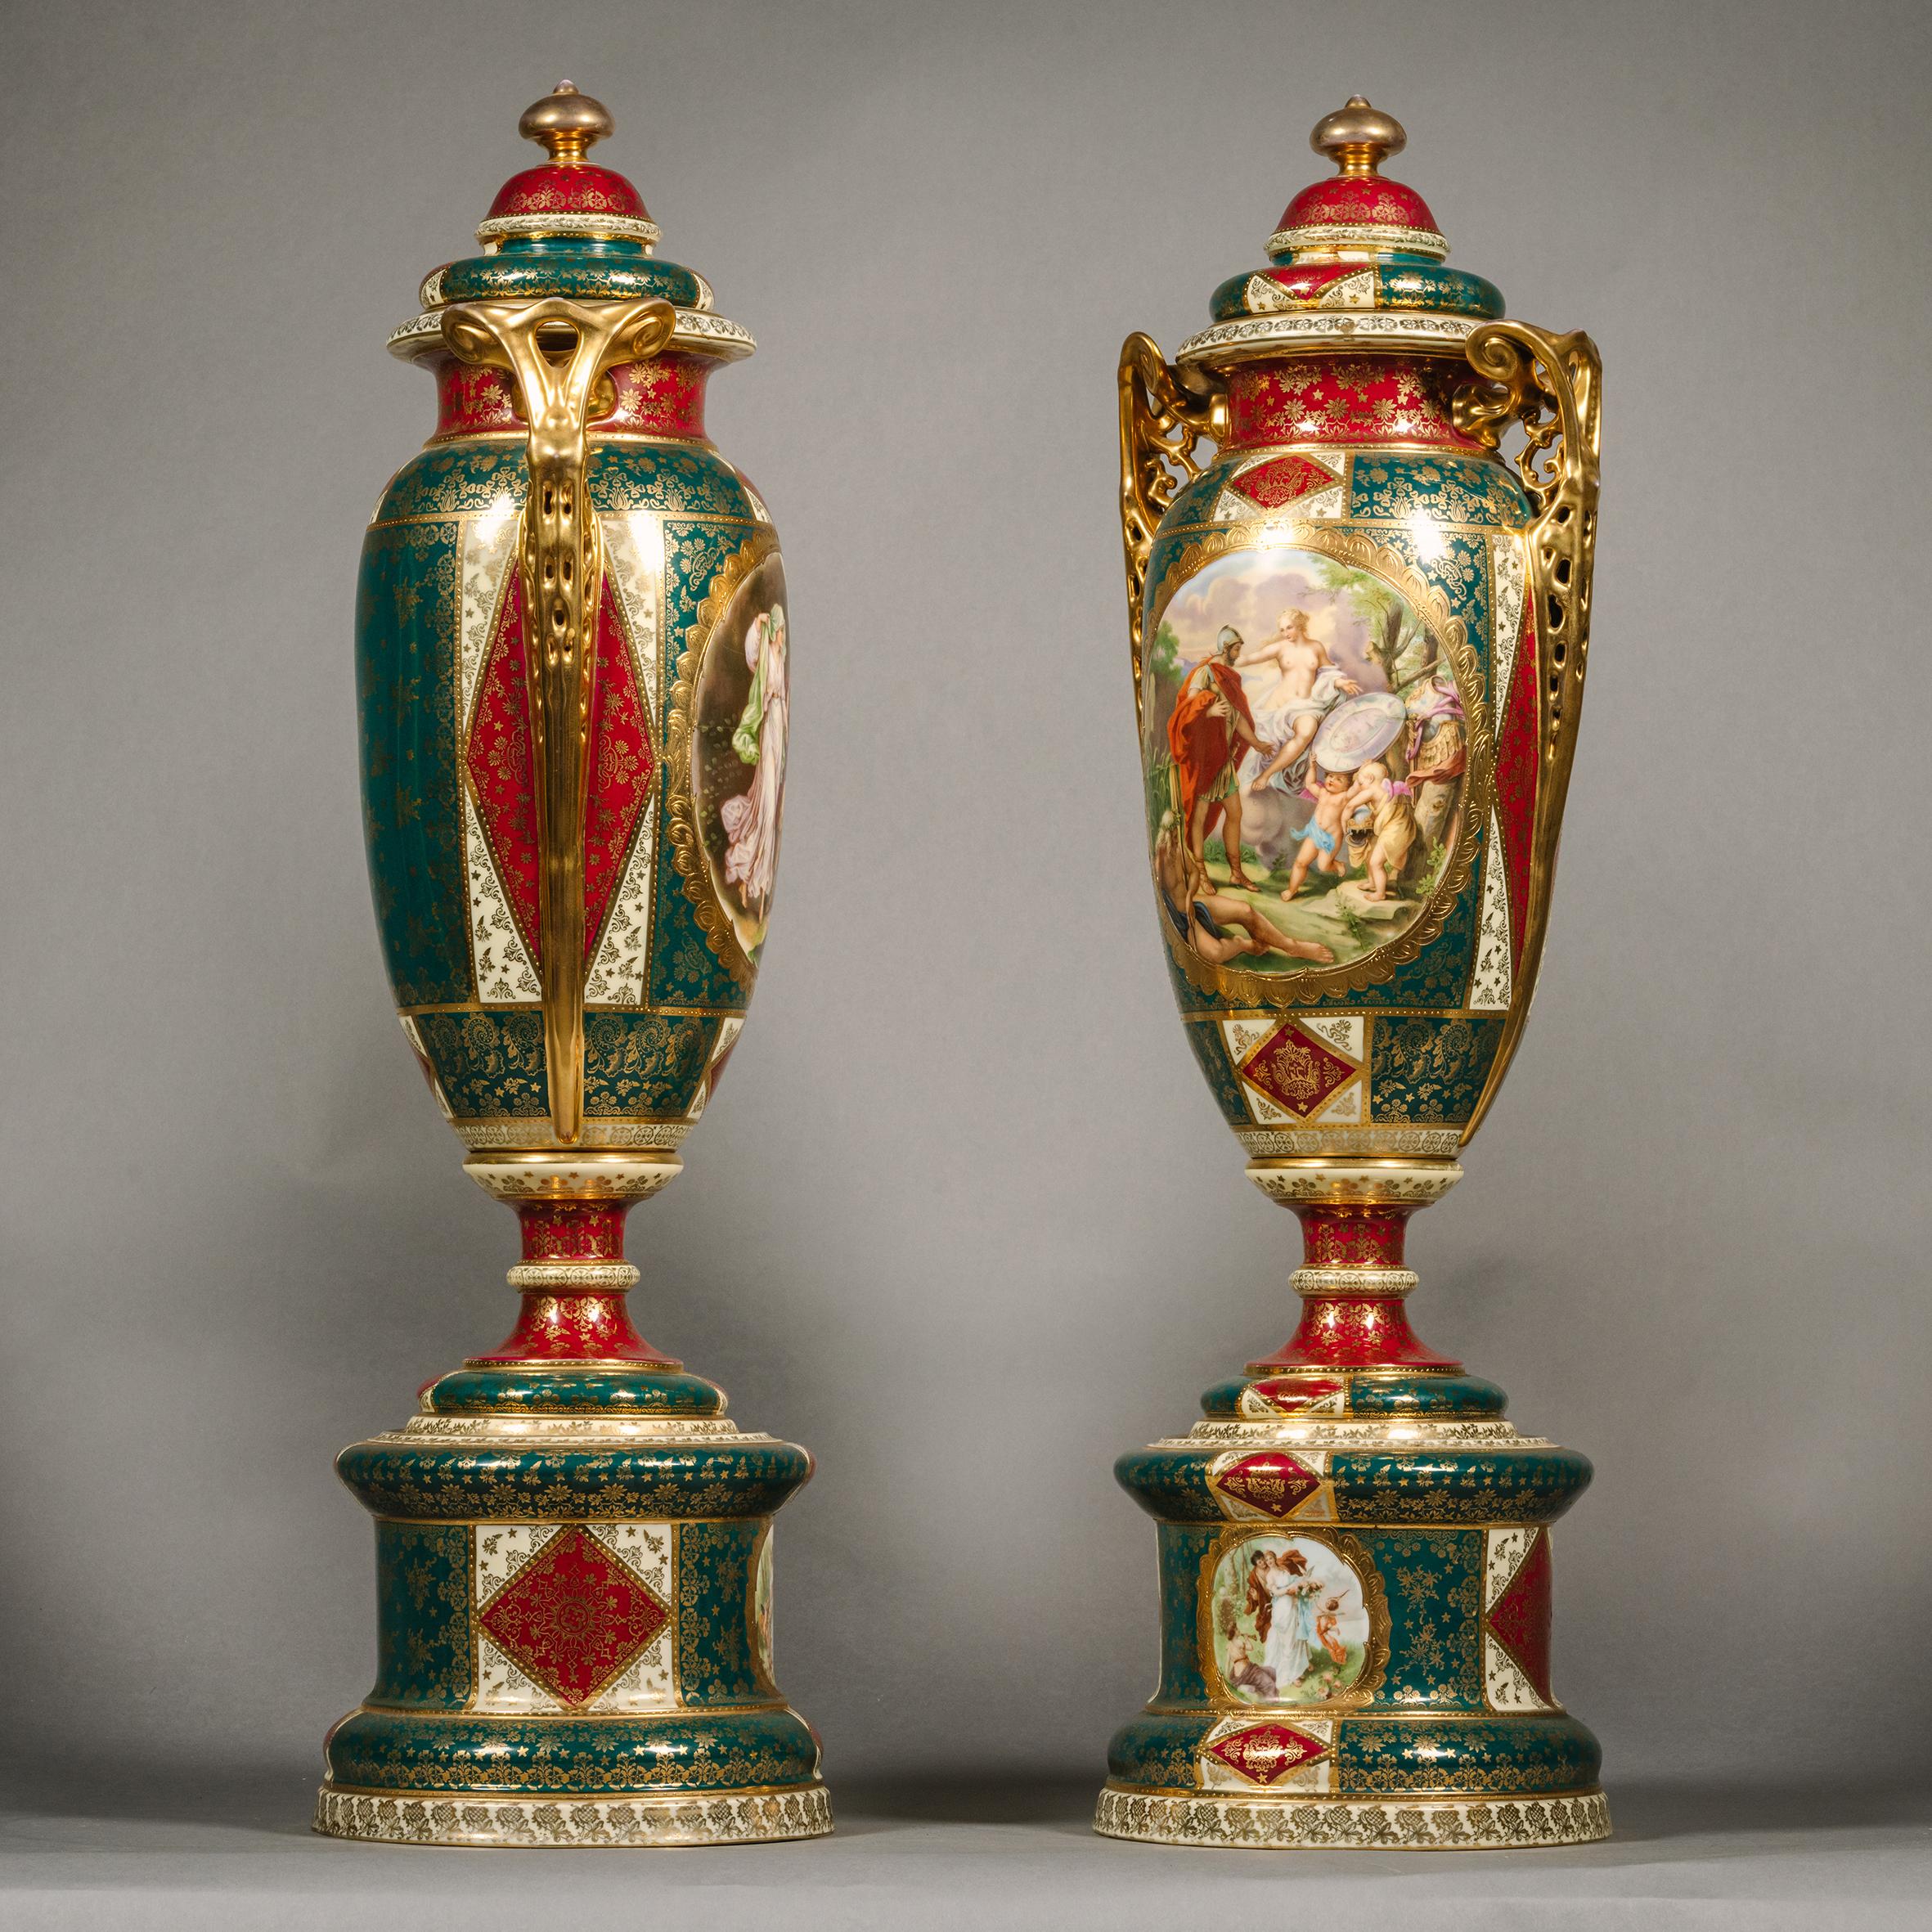 A Large Pair of Vienna Style Porcelain Vases and Covers.

Each of tapering baluster shape decorated with gilt flowers and anthemion against a claret and ivy green ground. The front with finely painted reserves depicting classical scenes of  Minerva